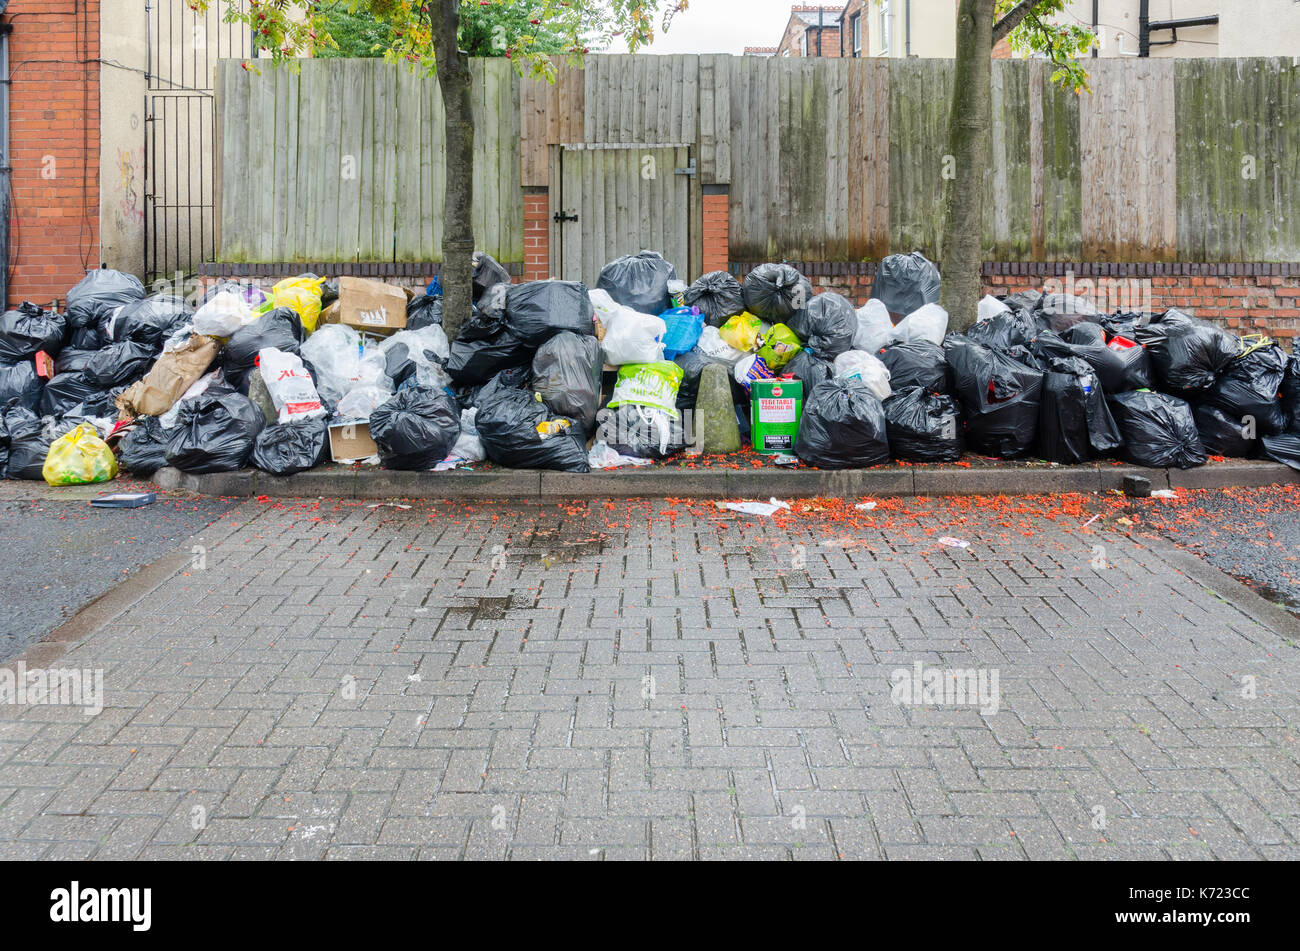 Sparkhill, Birmingham, UK. 14th September 2017. As the long running dispute between refuse collectors and Birmingham City Council shows no sign of ending piles of rubbish continue to grow on the streets.Credit: Nick Maslen/Alamy Live News Stock Photo